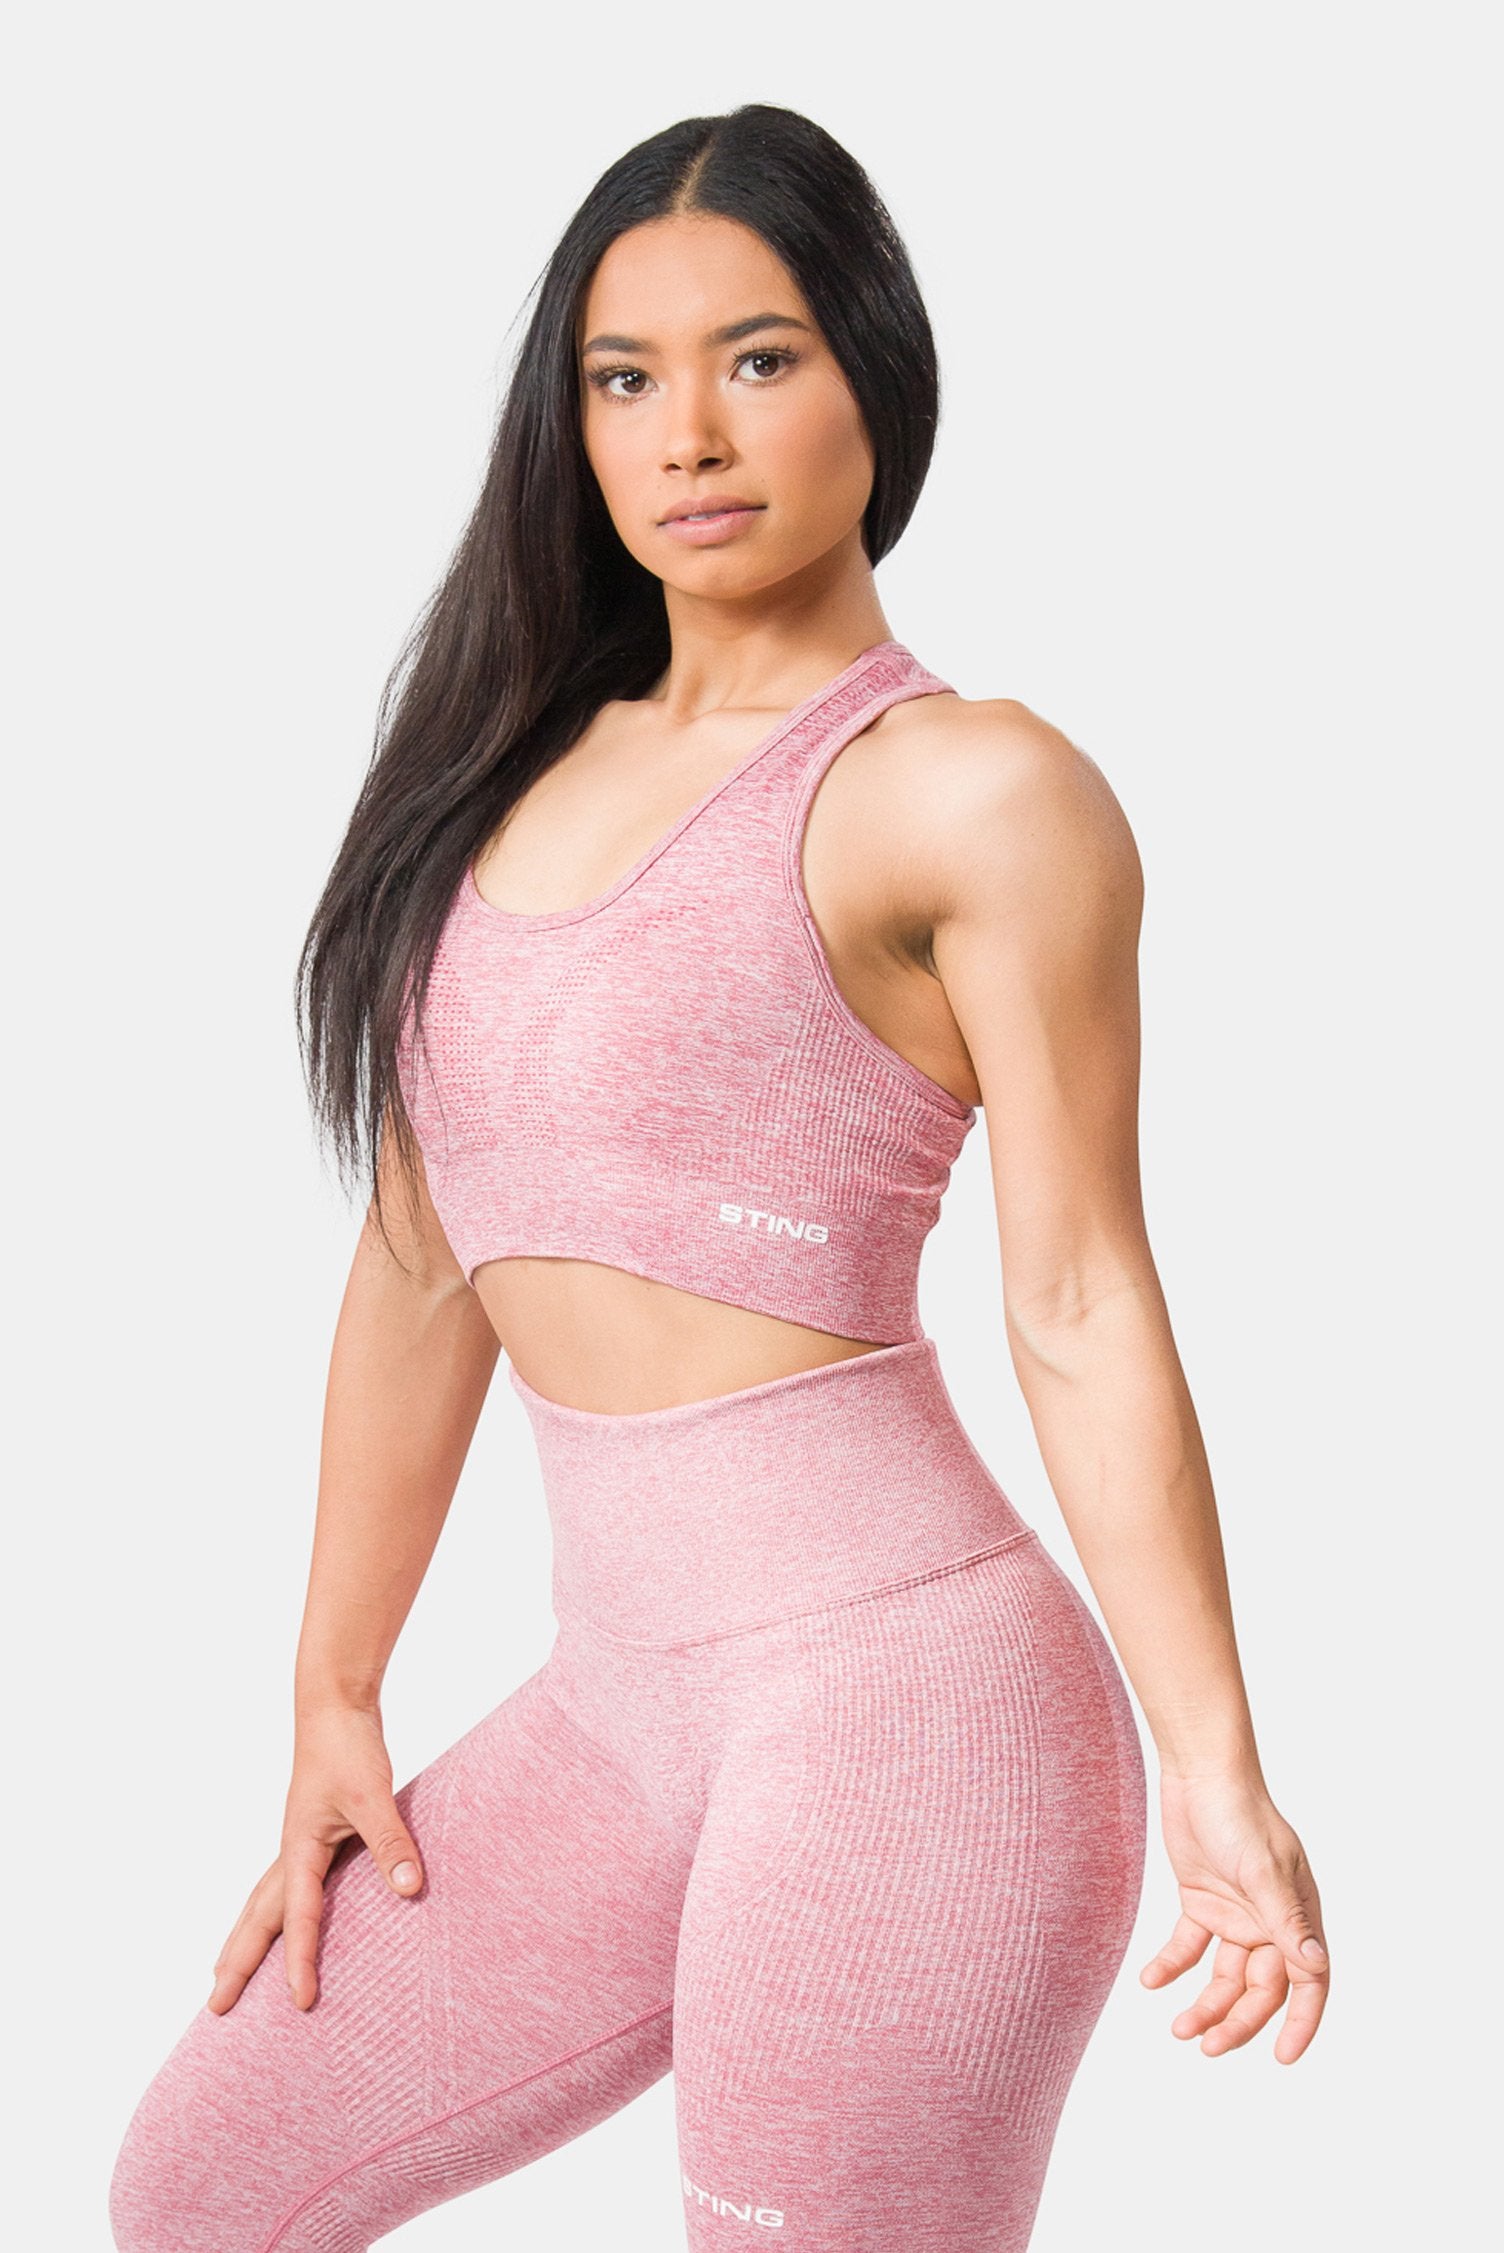 Women's Activewear & Workout Clothes for Women